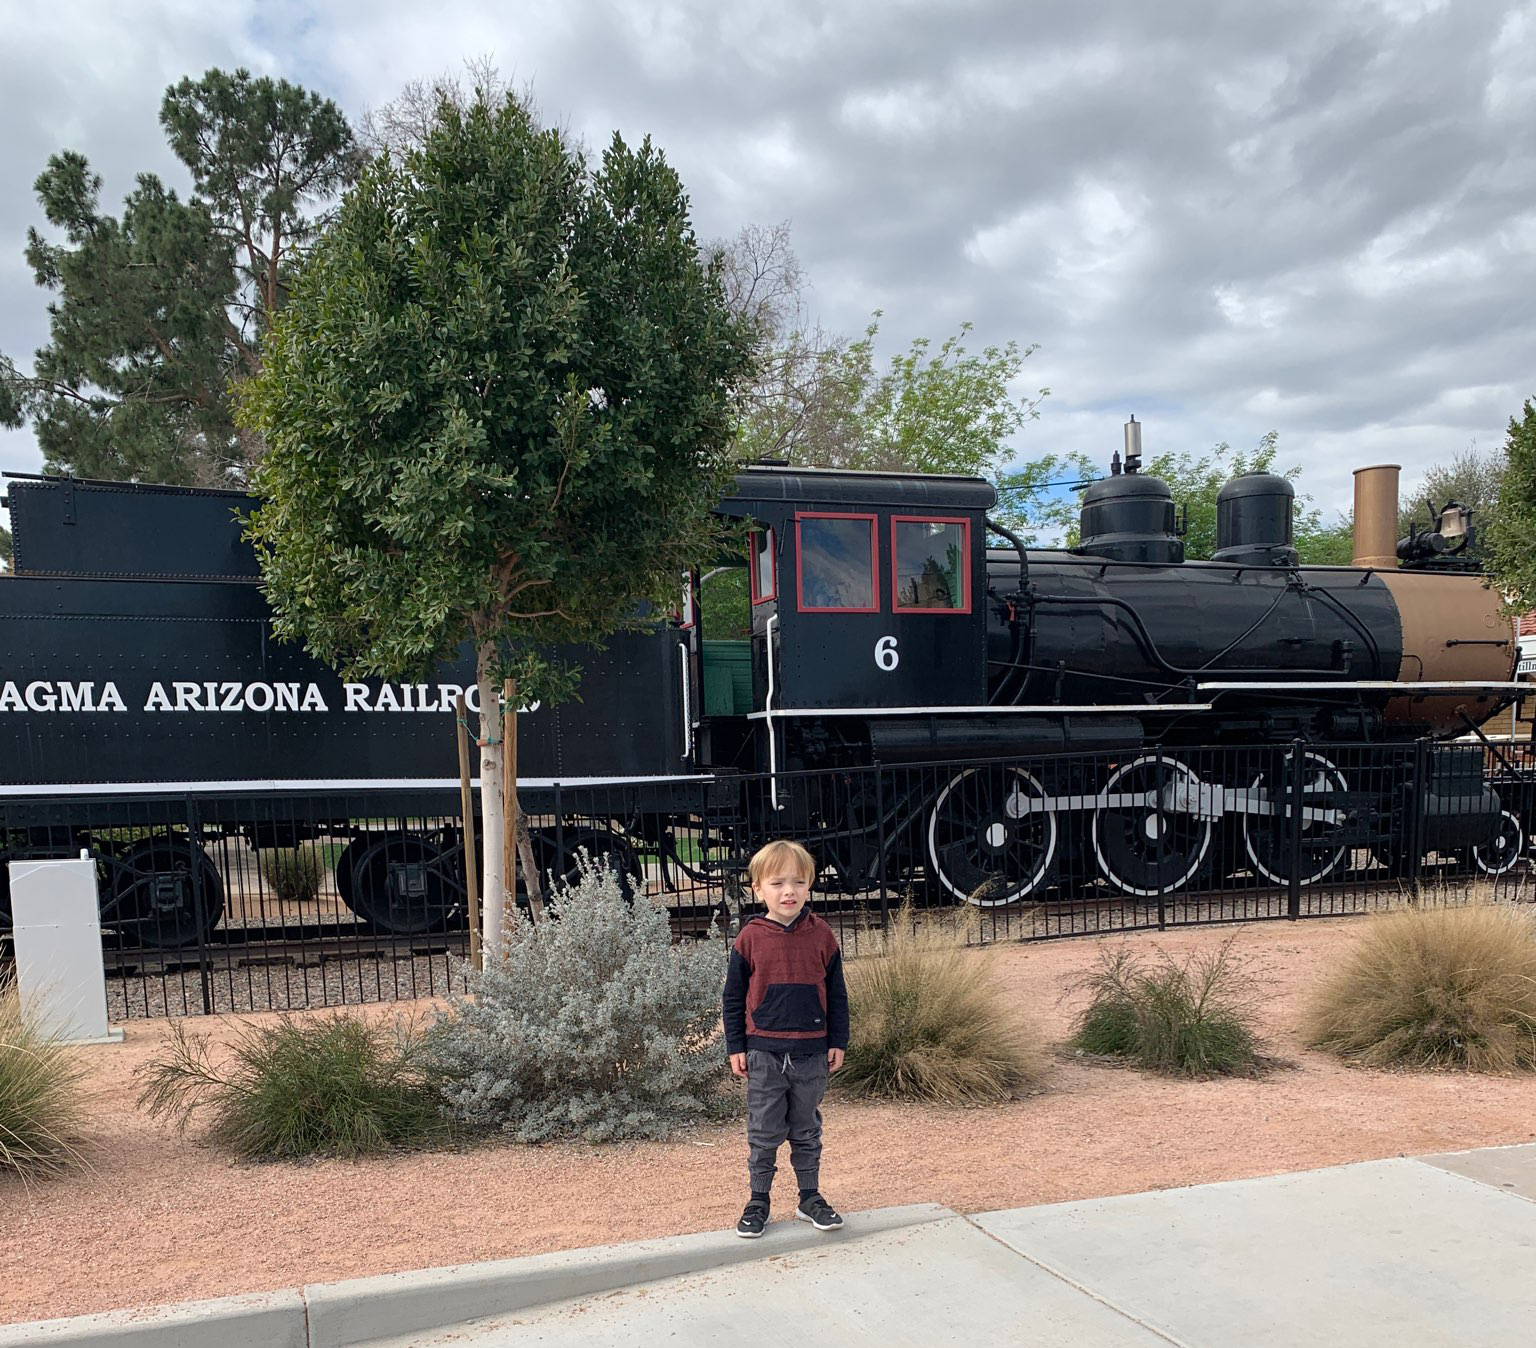 A boy stands in front of a steam engine in a park.